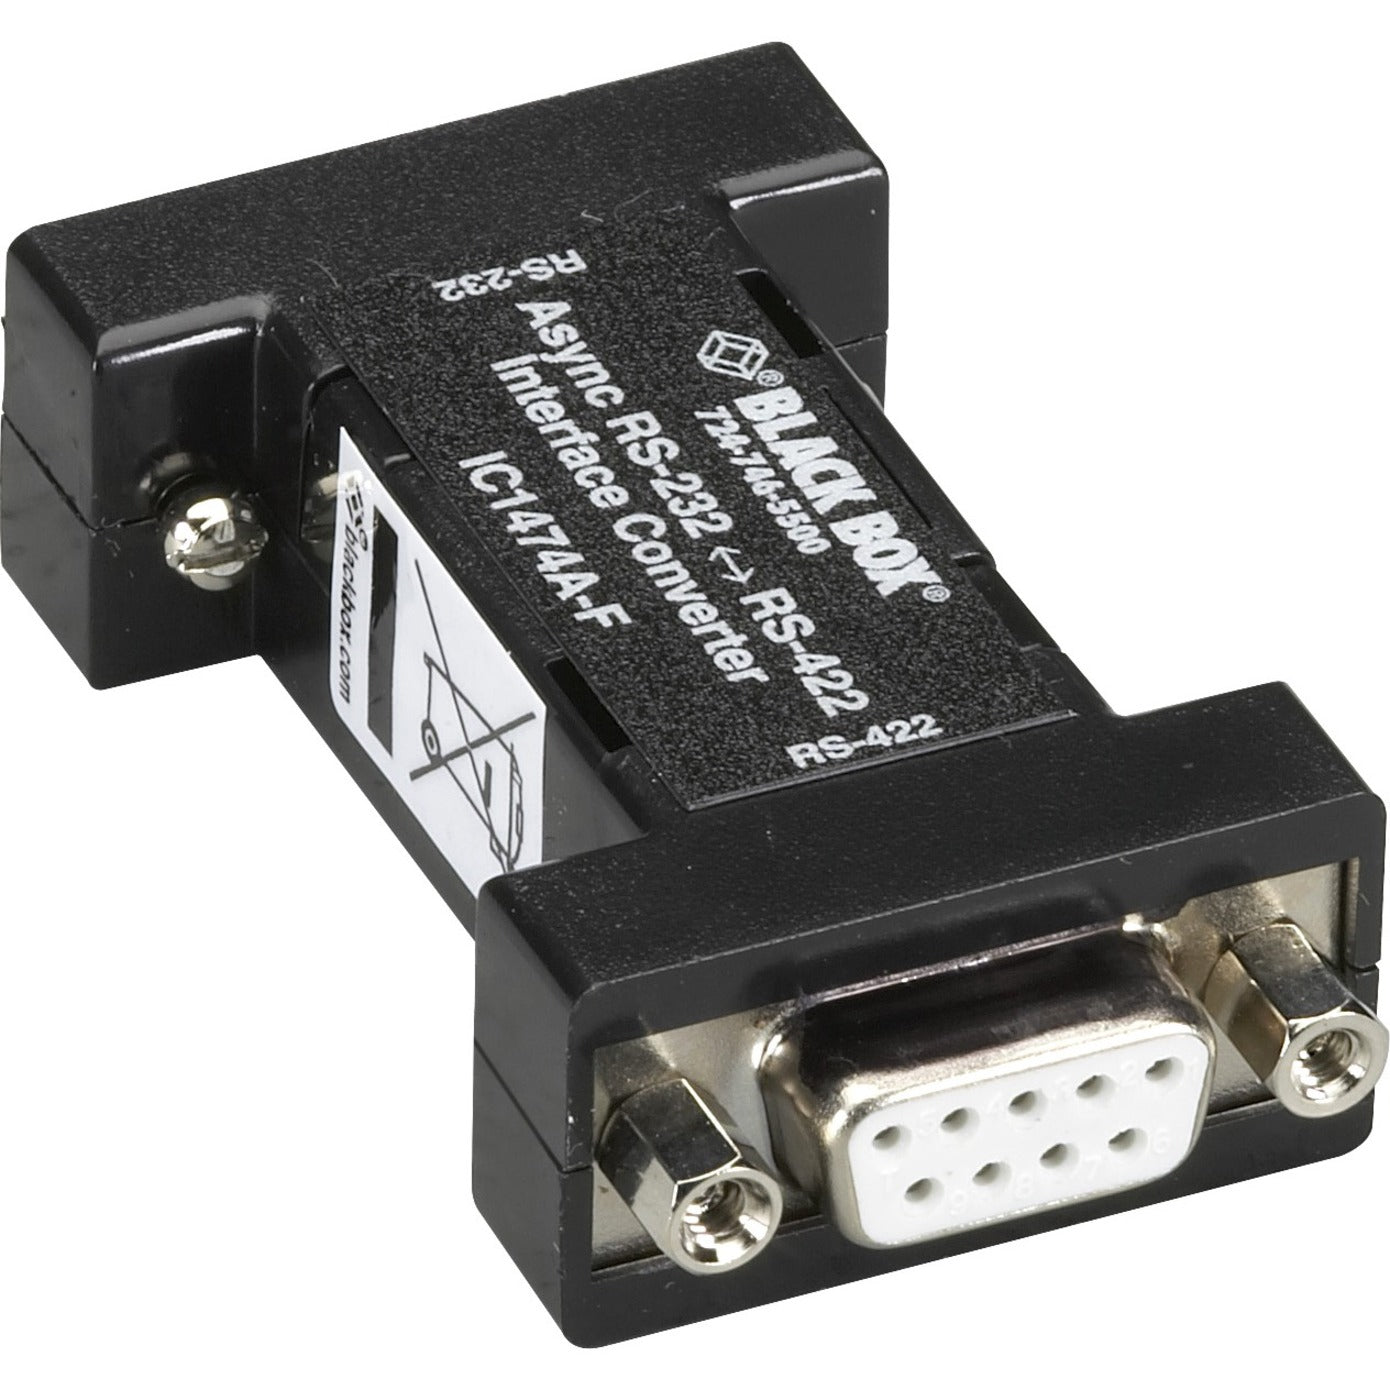 Black Box IC1474A-F RS232 to RS-422 Interface Bidirectional Converter, 2 Ports, 4000 ft Distance Supported